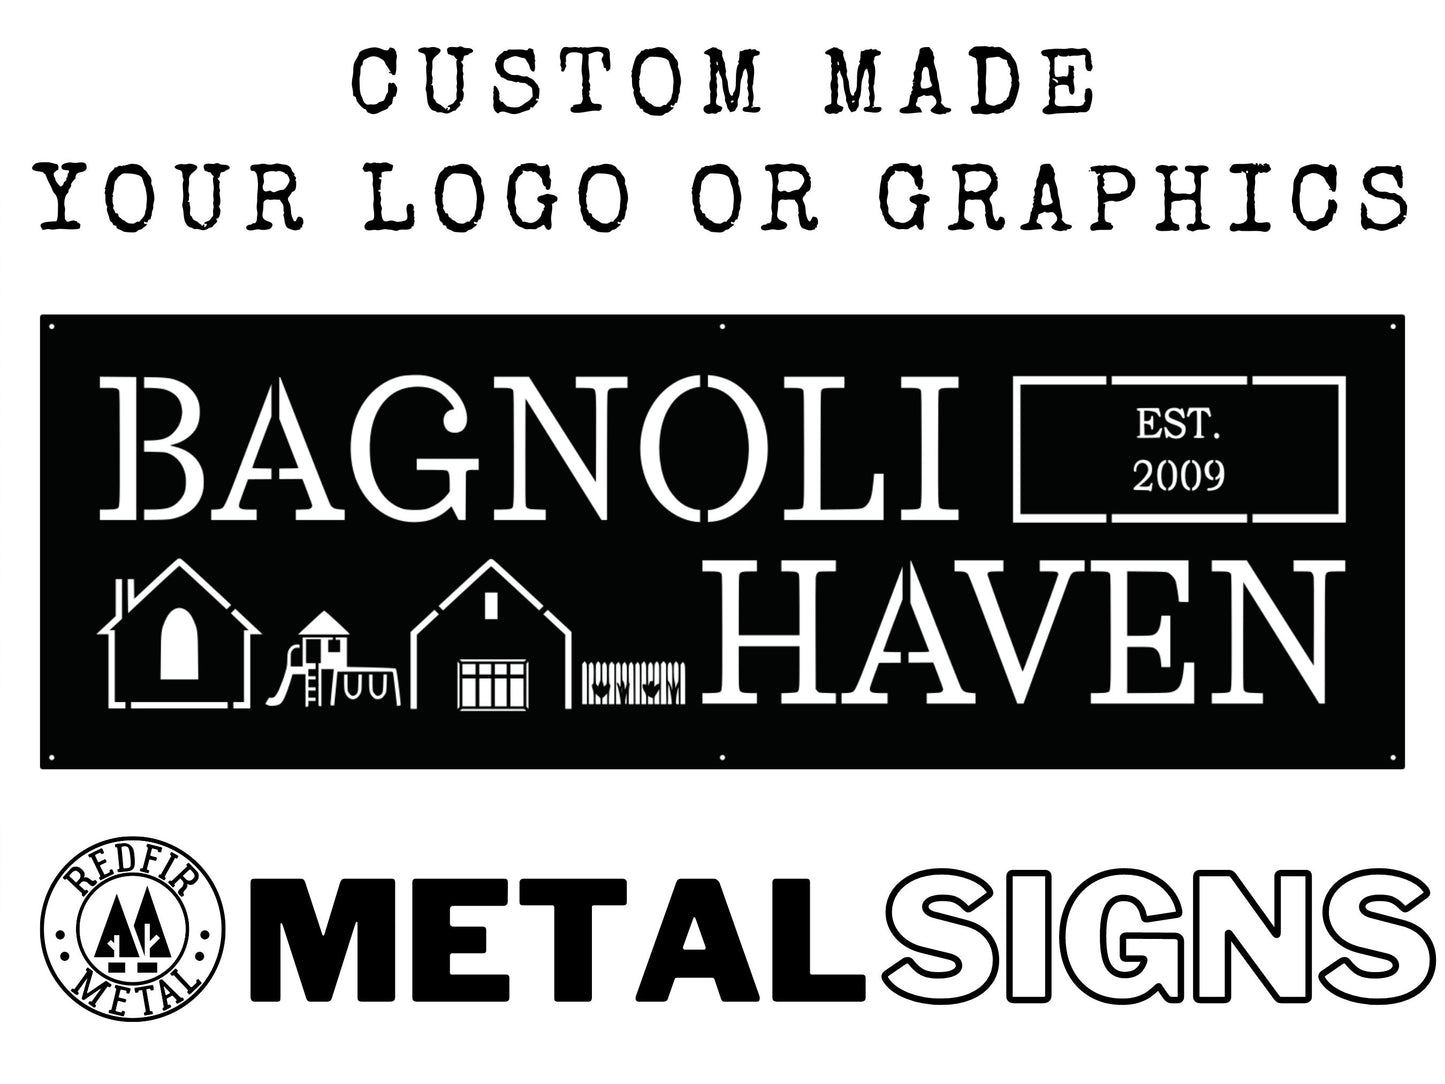 Personalized Business Logo Metal Art Signs - Your Logo or Design - Custom Sign - Wedding Gifts - Metal Wall Decor - Address Sign